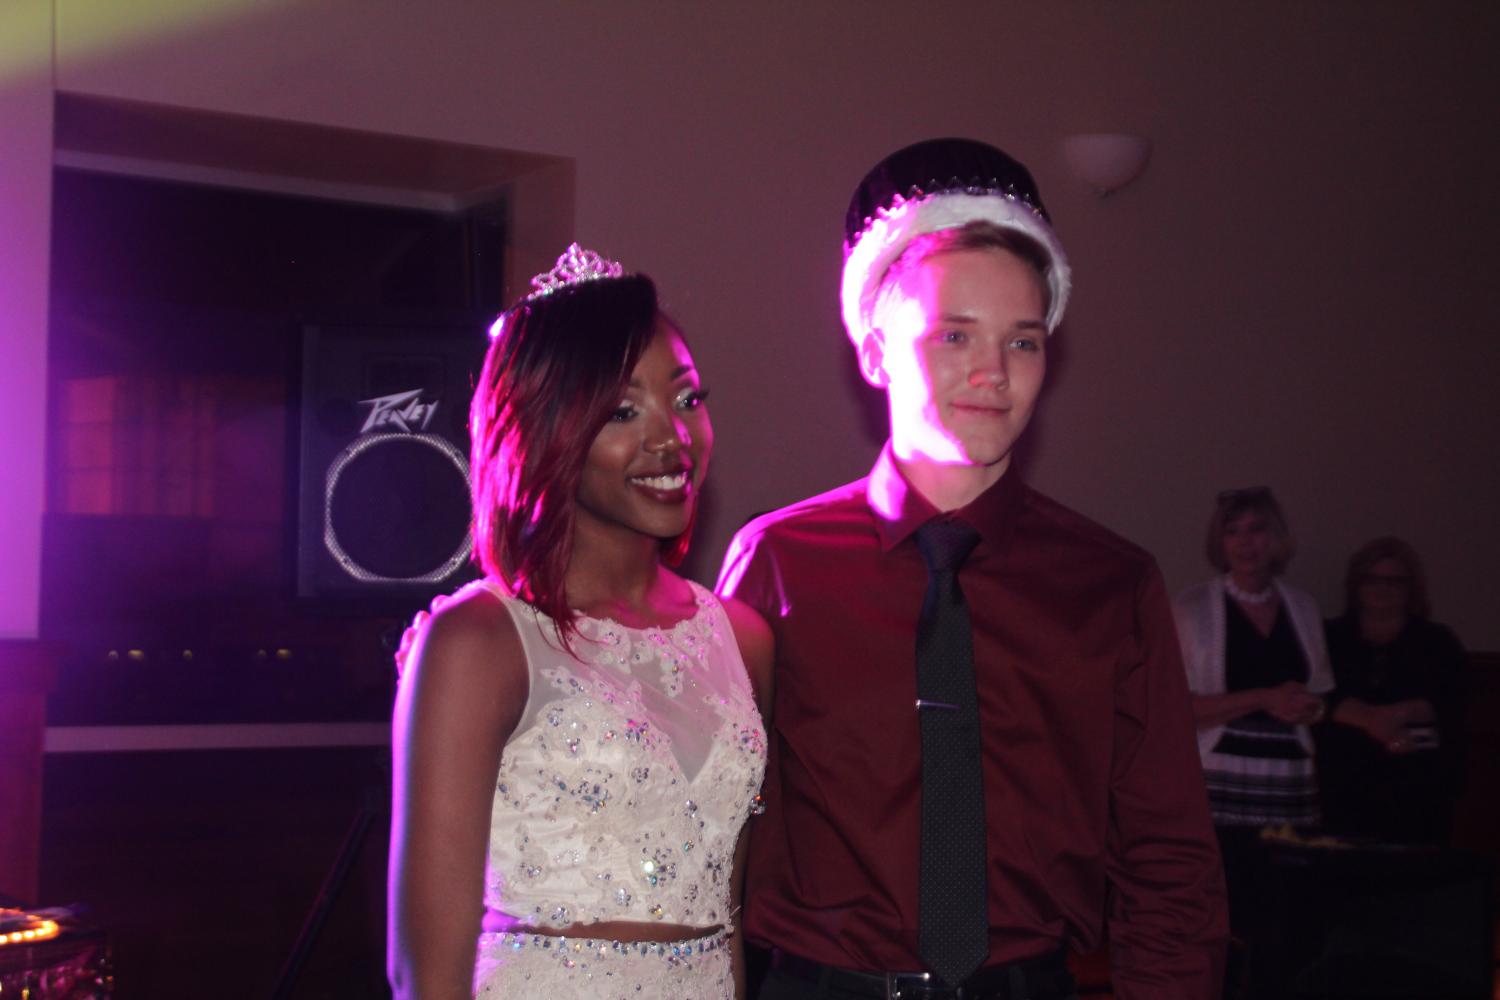 Prom+queen+and+king%3A+Janelle+Hill+%28queen%2C+left%29%2C+Caleb+Ostermann+%28king%2C+right%29